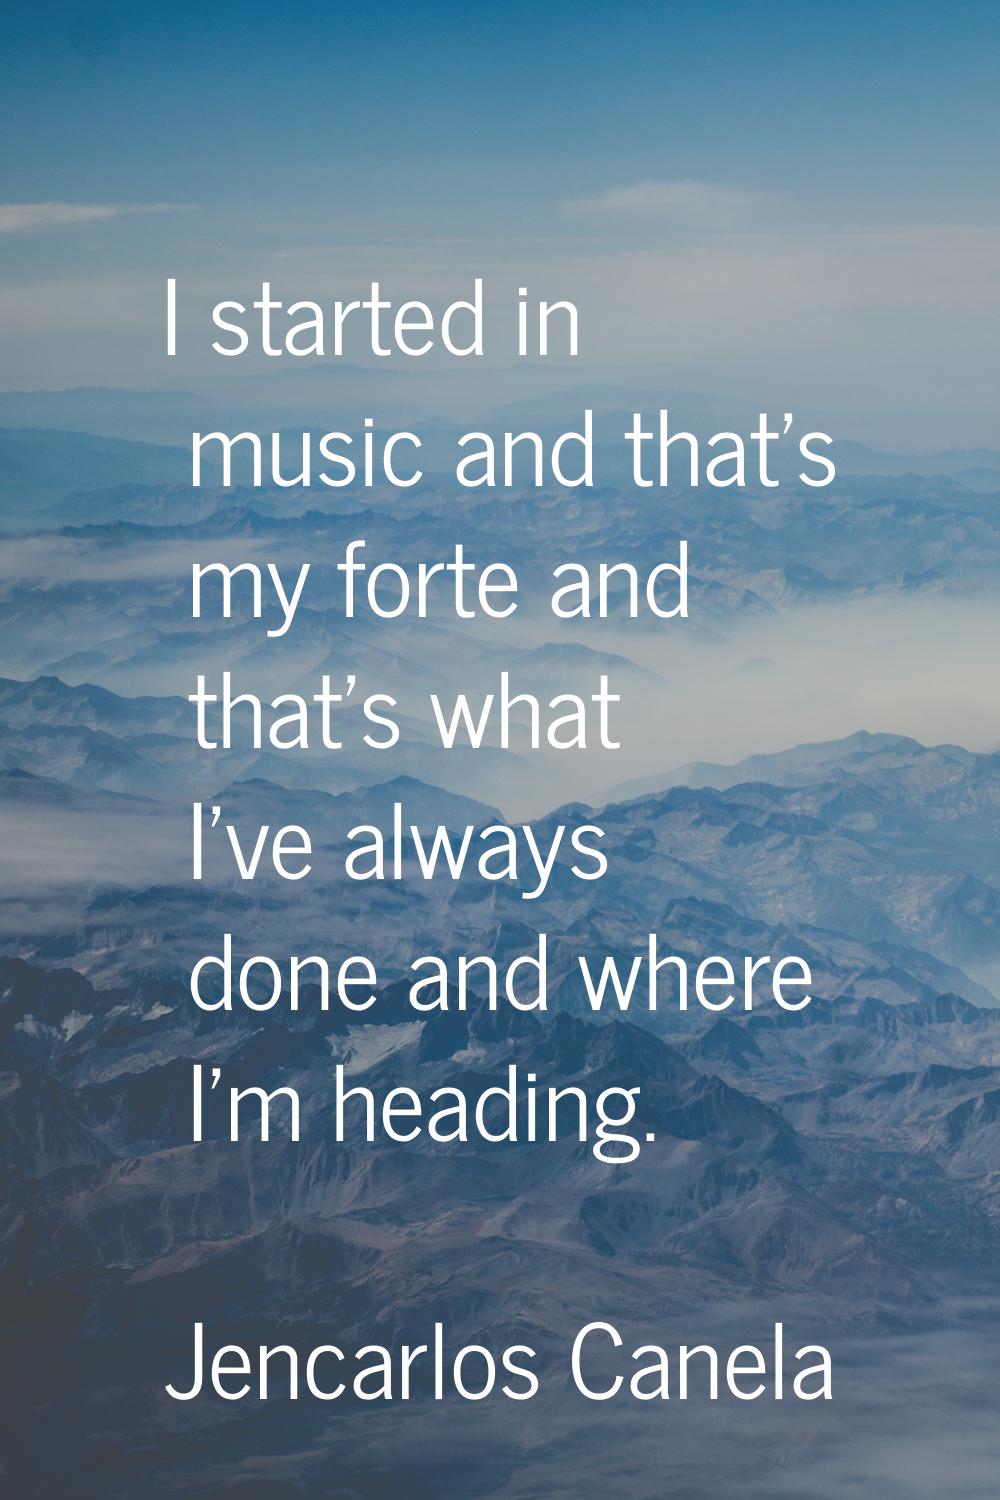 I started in music and that's my forte and that's what I've always done and where I'm heading.